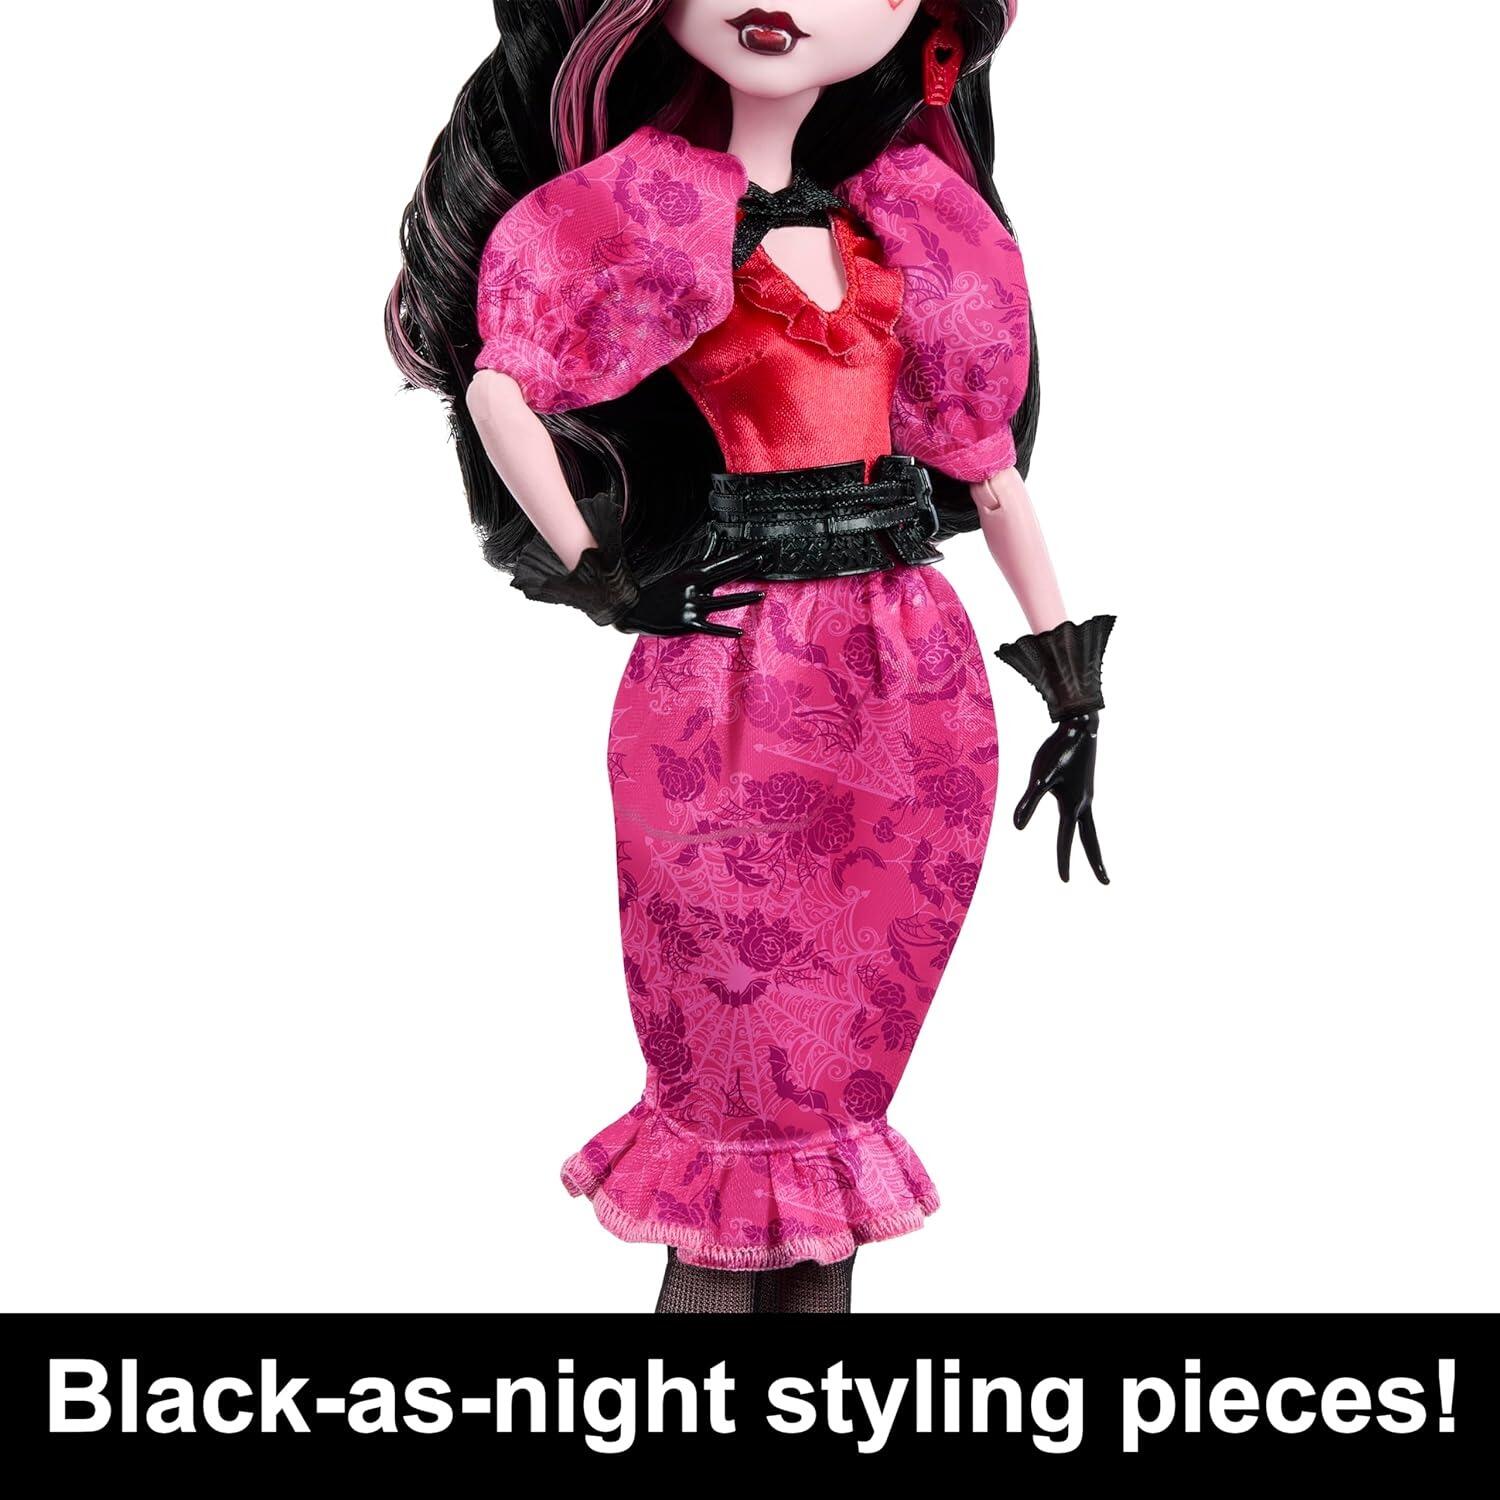 Monster High Dolls, Draculaura and Clawd Wolf Howliday Love Edition Collector Two-Pack